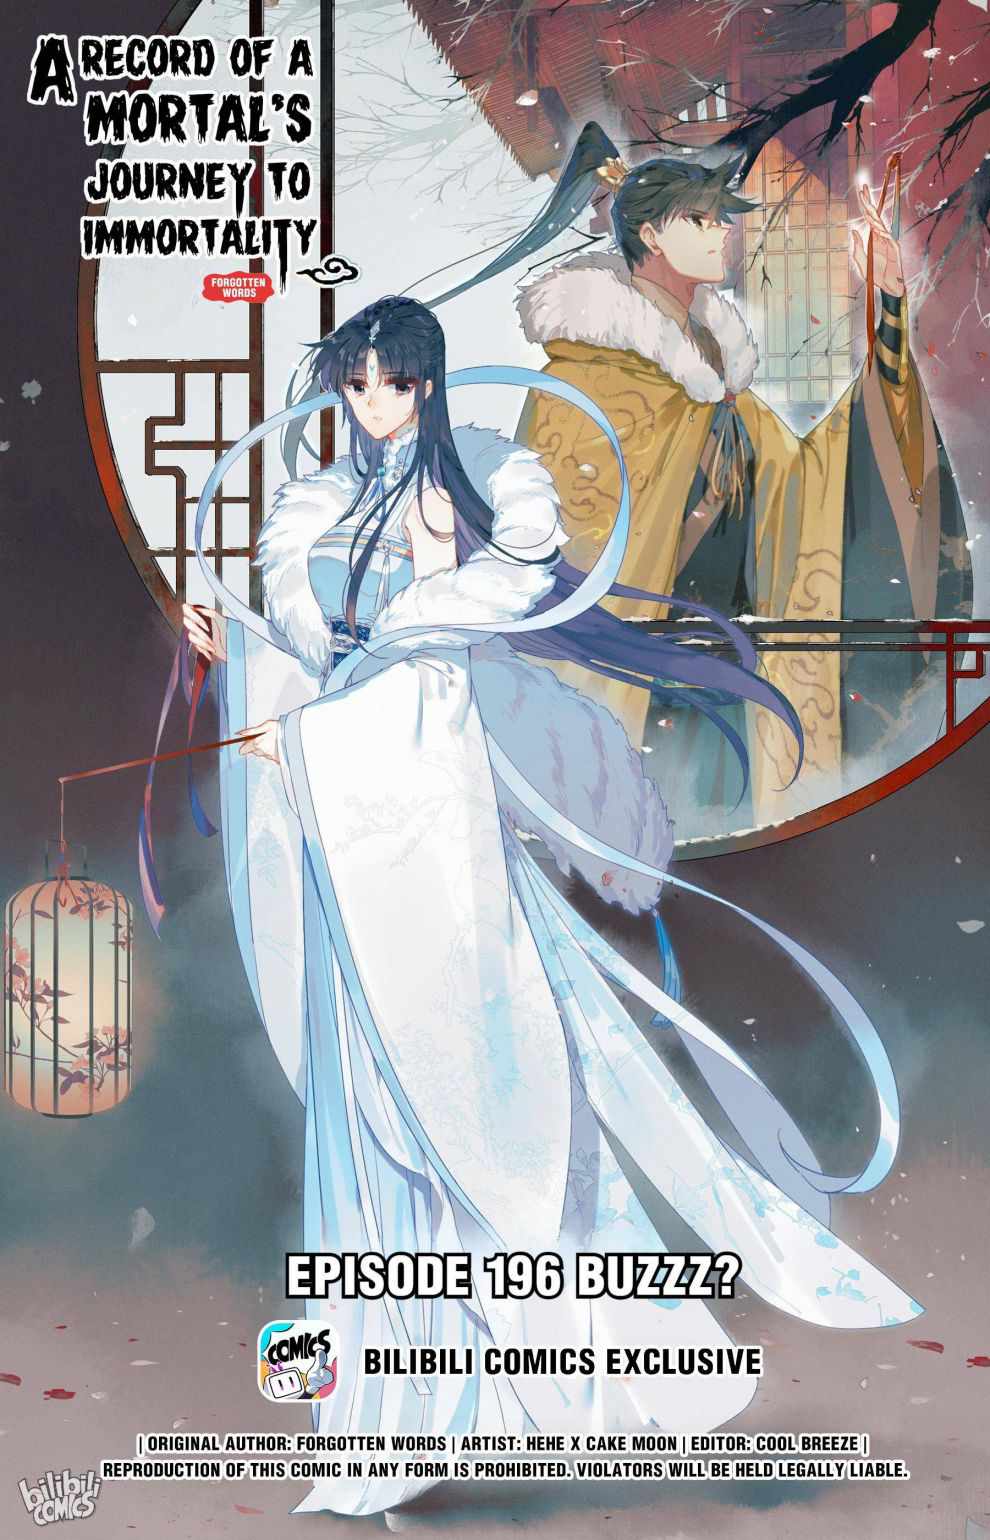 Mortal's Cultivation: journey to immortality Chapter 196